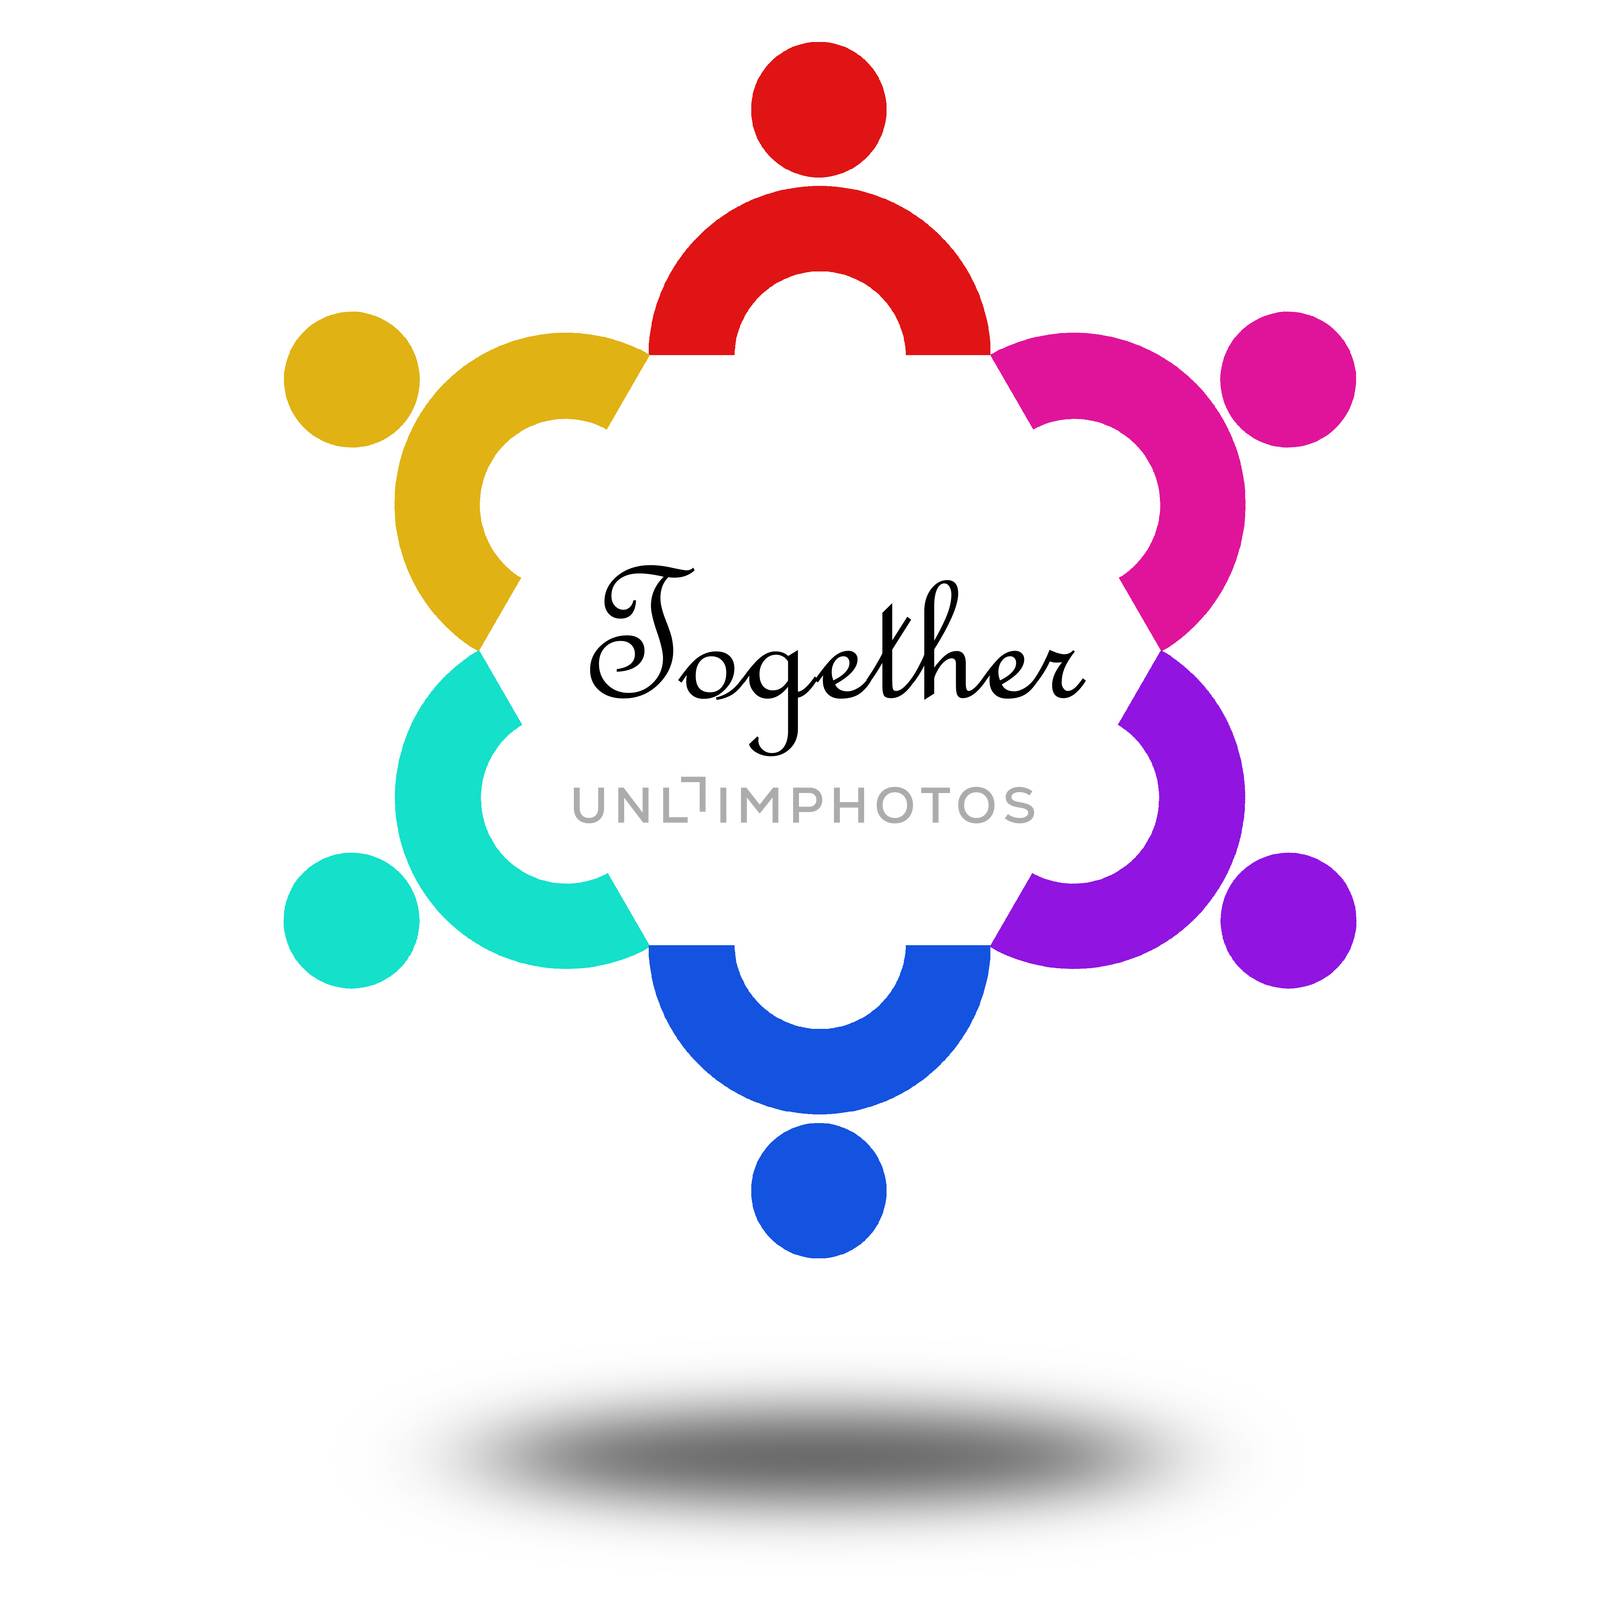 Together image with hi-res rendered artwork that could be used for any graphic design.